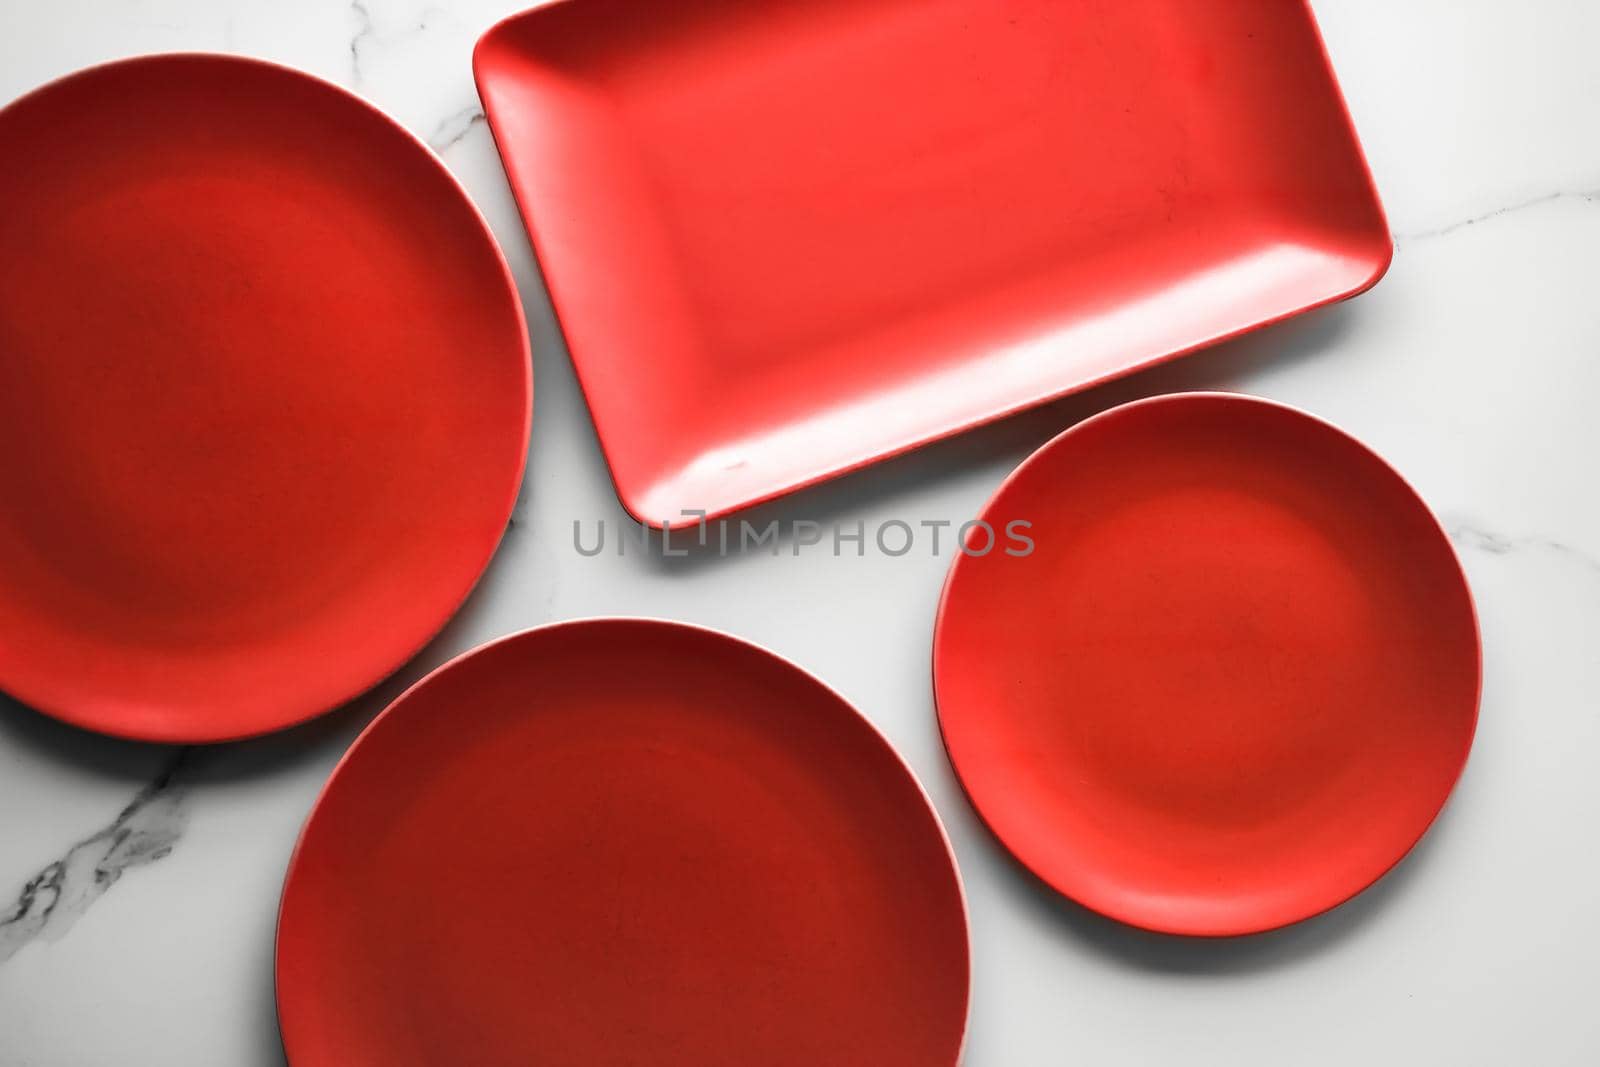 empty red plate on marble - recipe and restaurant mockup flatlay concept by Anneleven